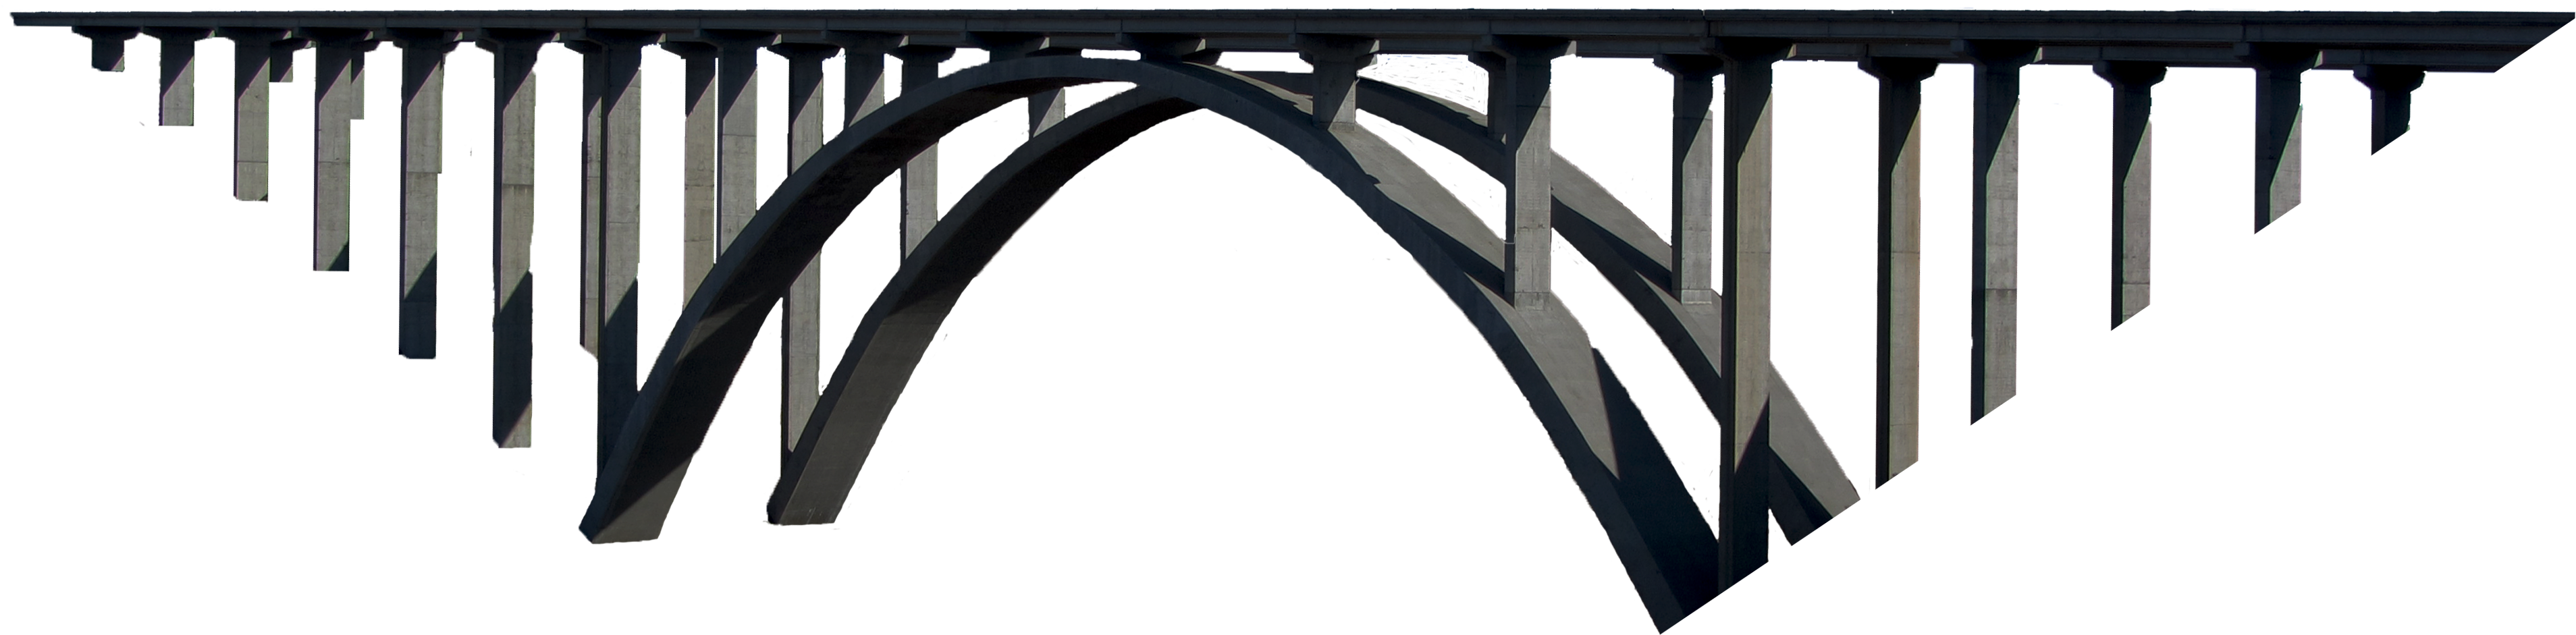 A Bridge With A Black Background